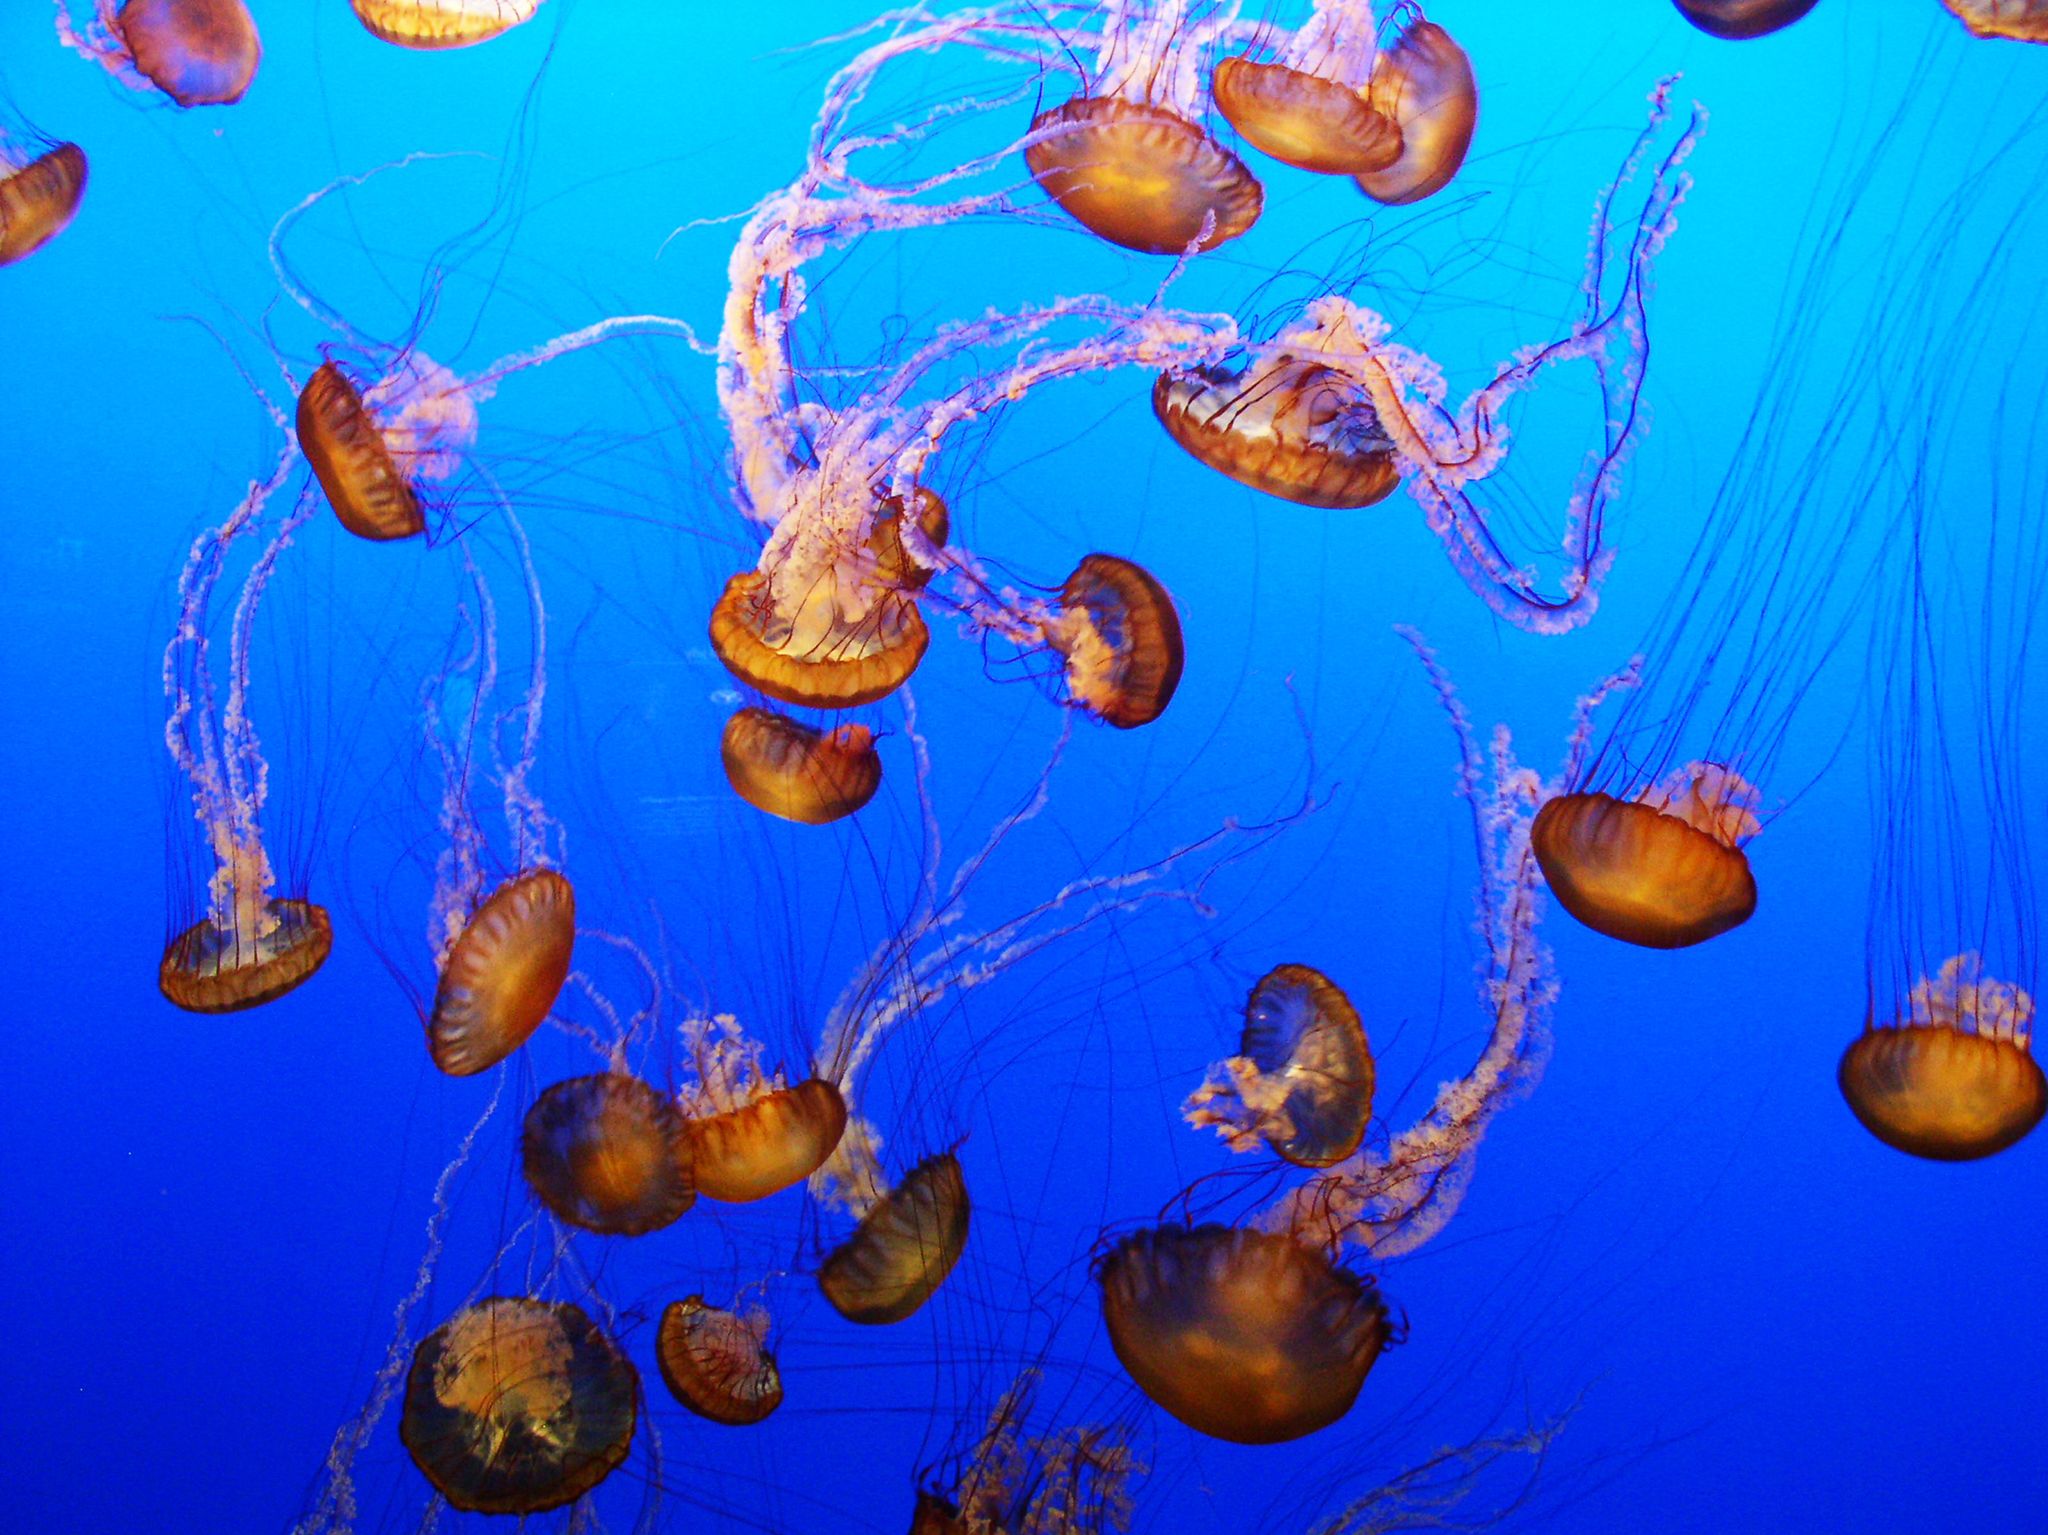 Chrysaora jellyfish swarm. This image is from Man V. Animal. [Photo of the day - September 2017]